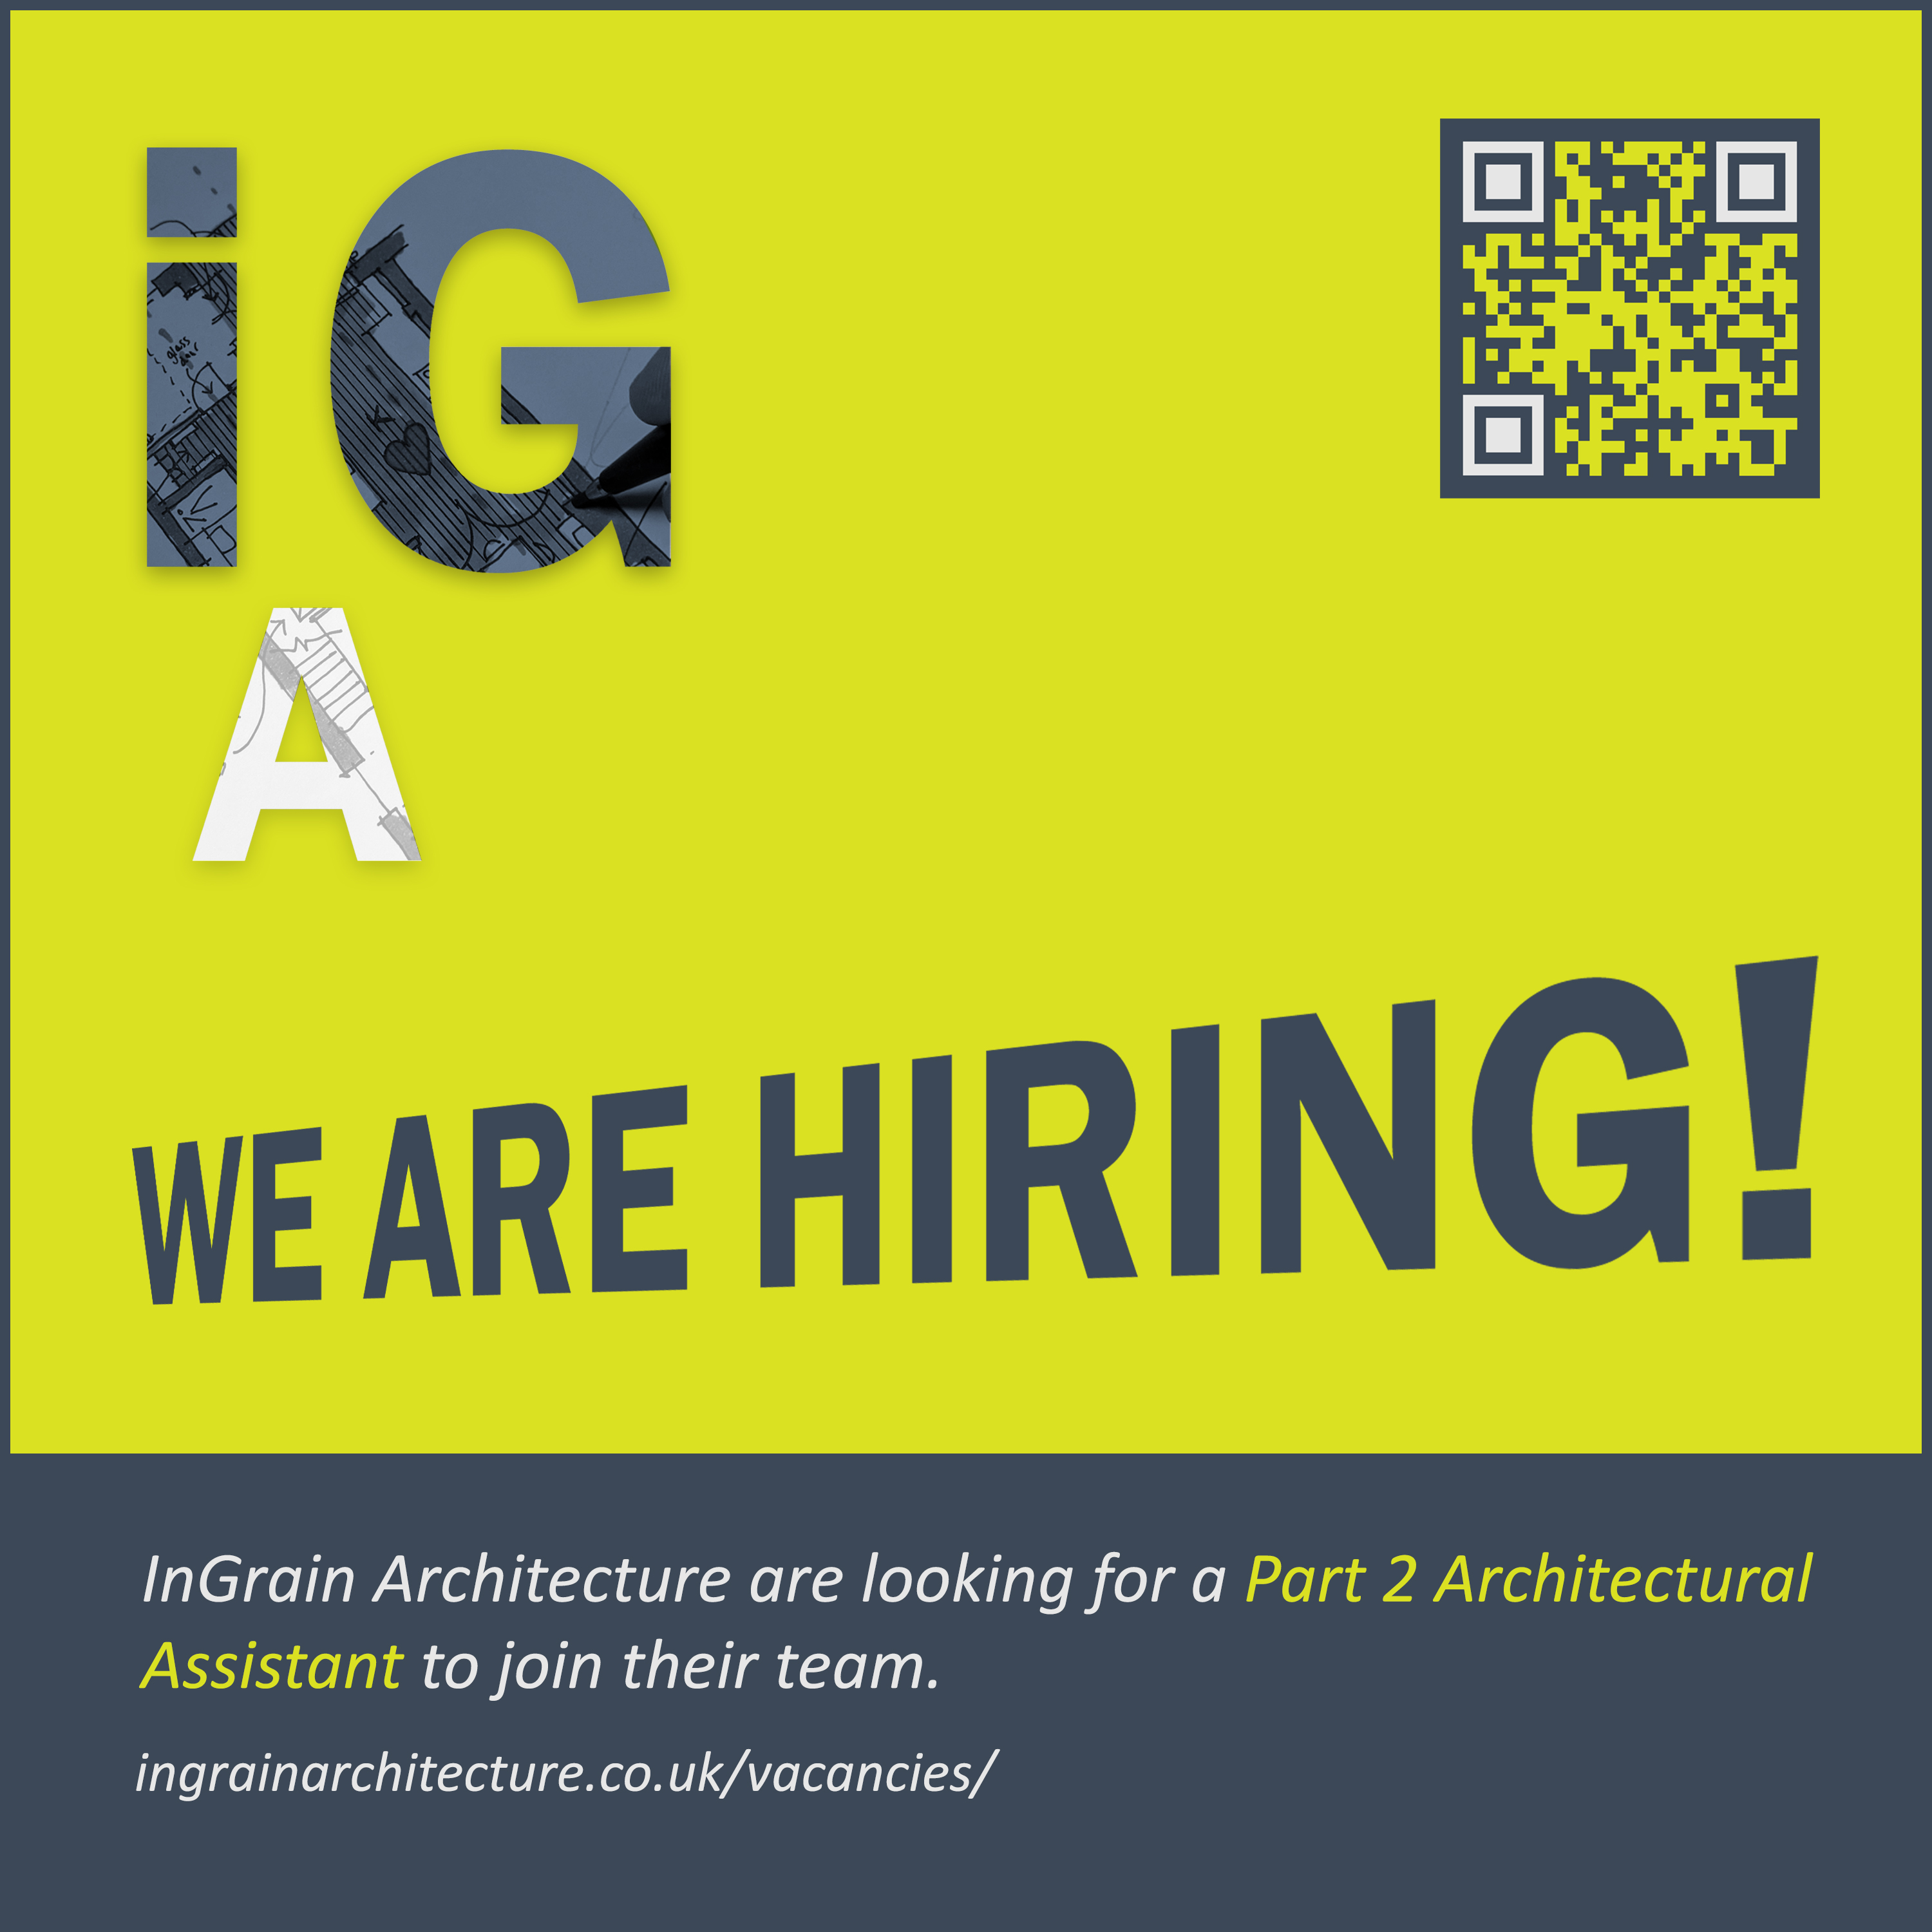 We are Hiring image